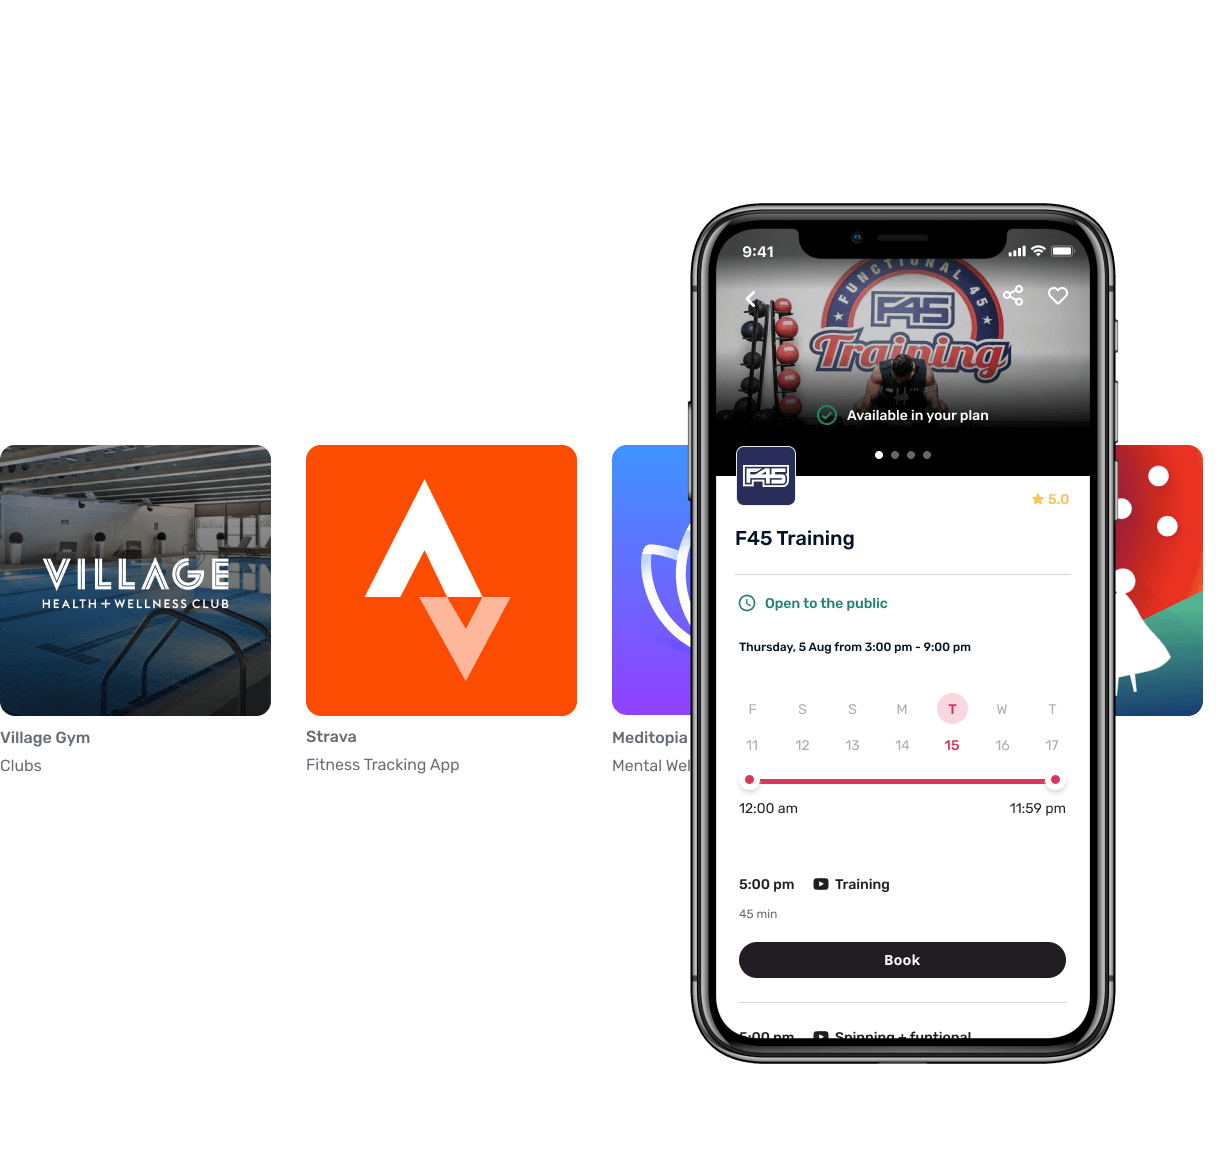 In your phone, you can choose what you want: Villagem gym, Strava App, Meditopia App, Fabulous App